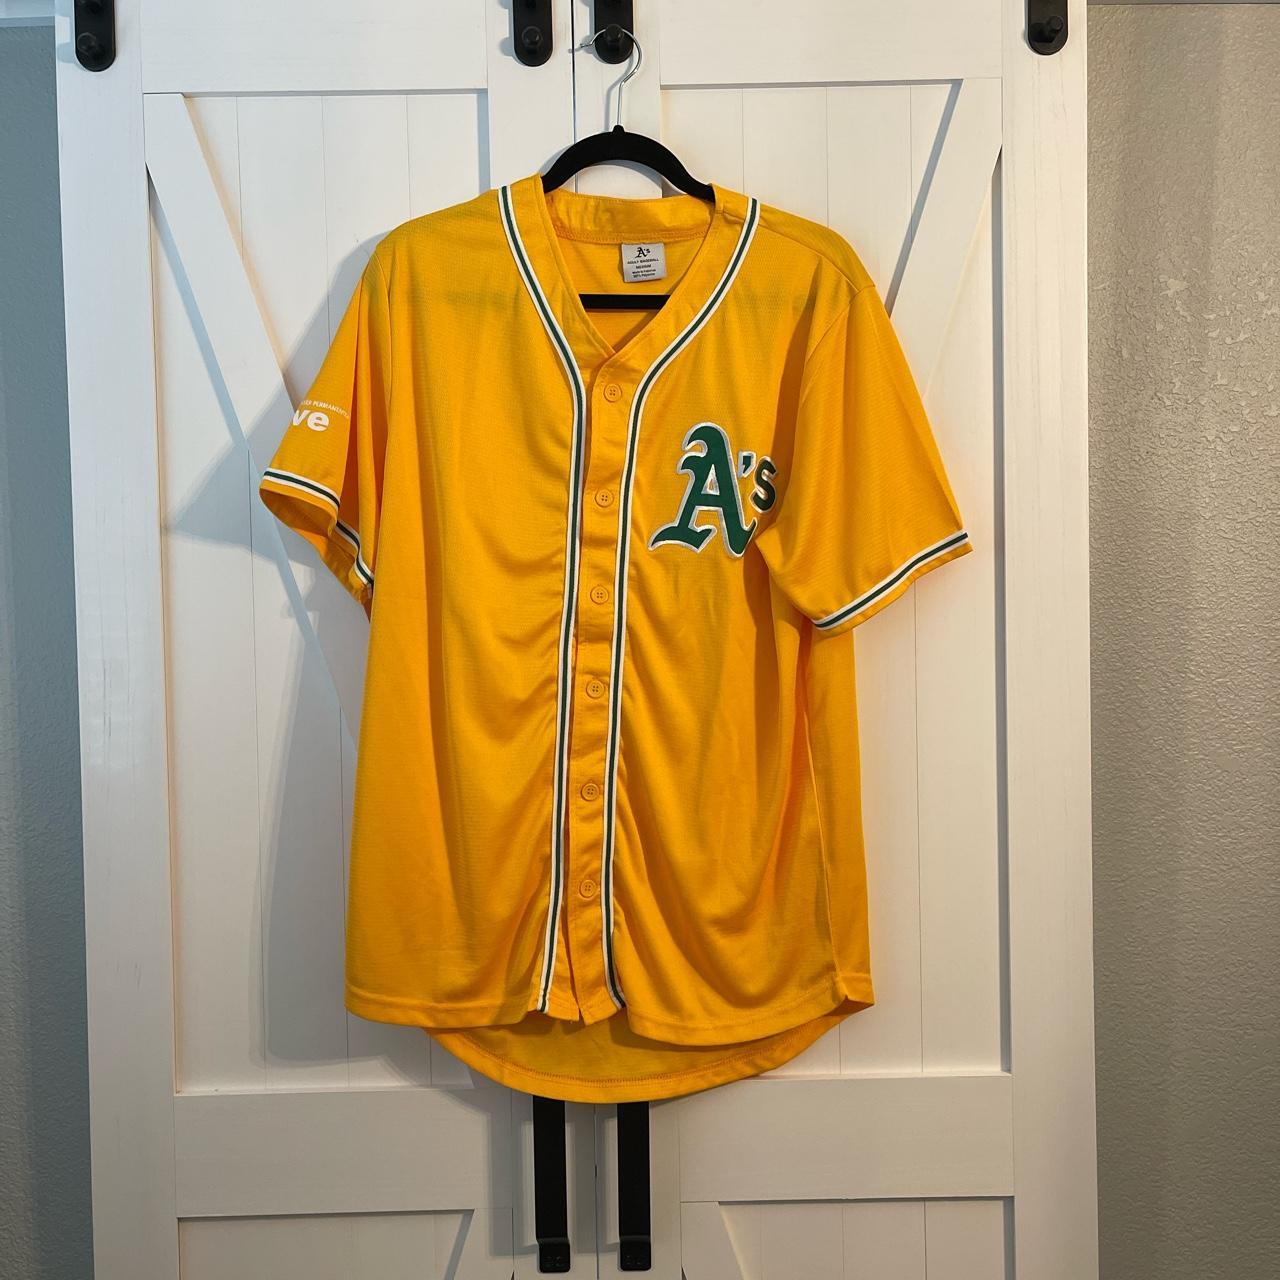 Oakland A's Jersey - size large - great condition - Depop